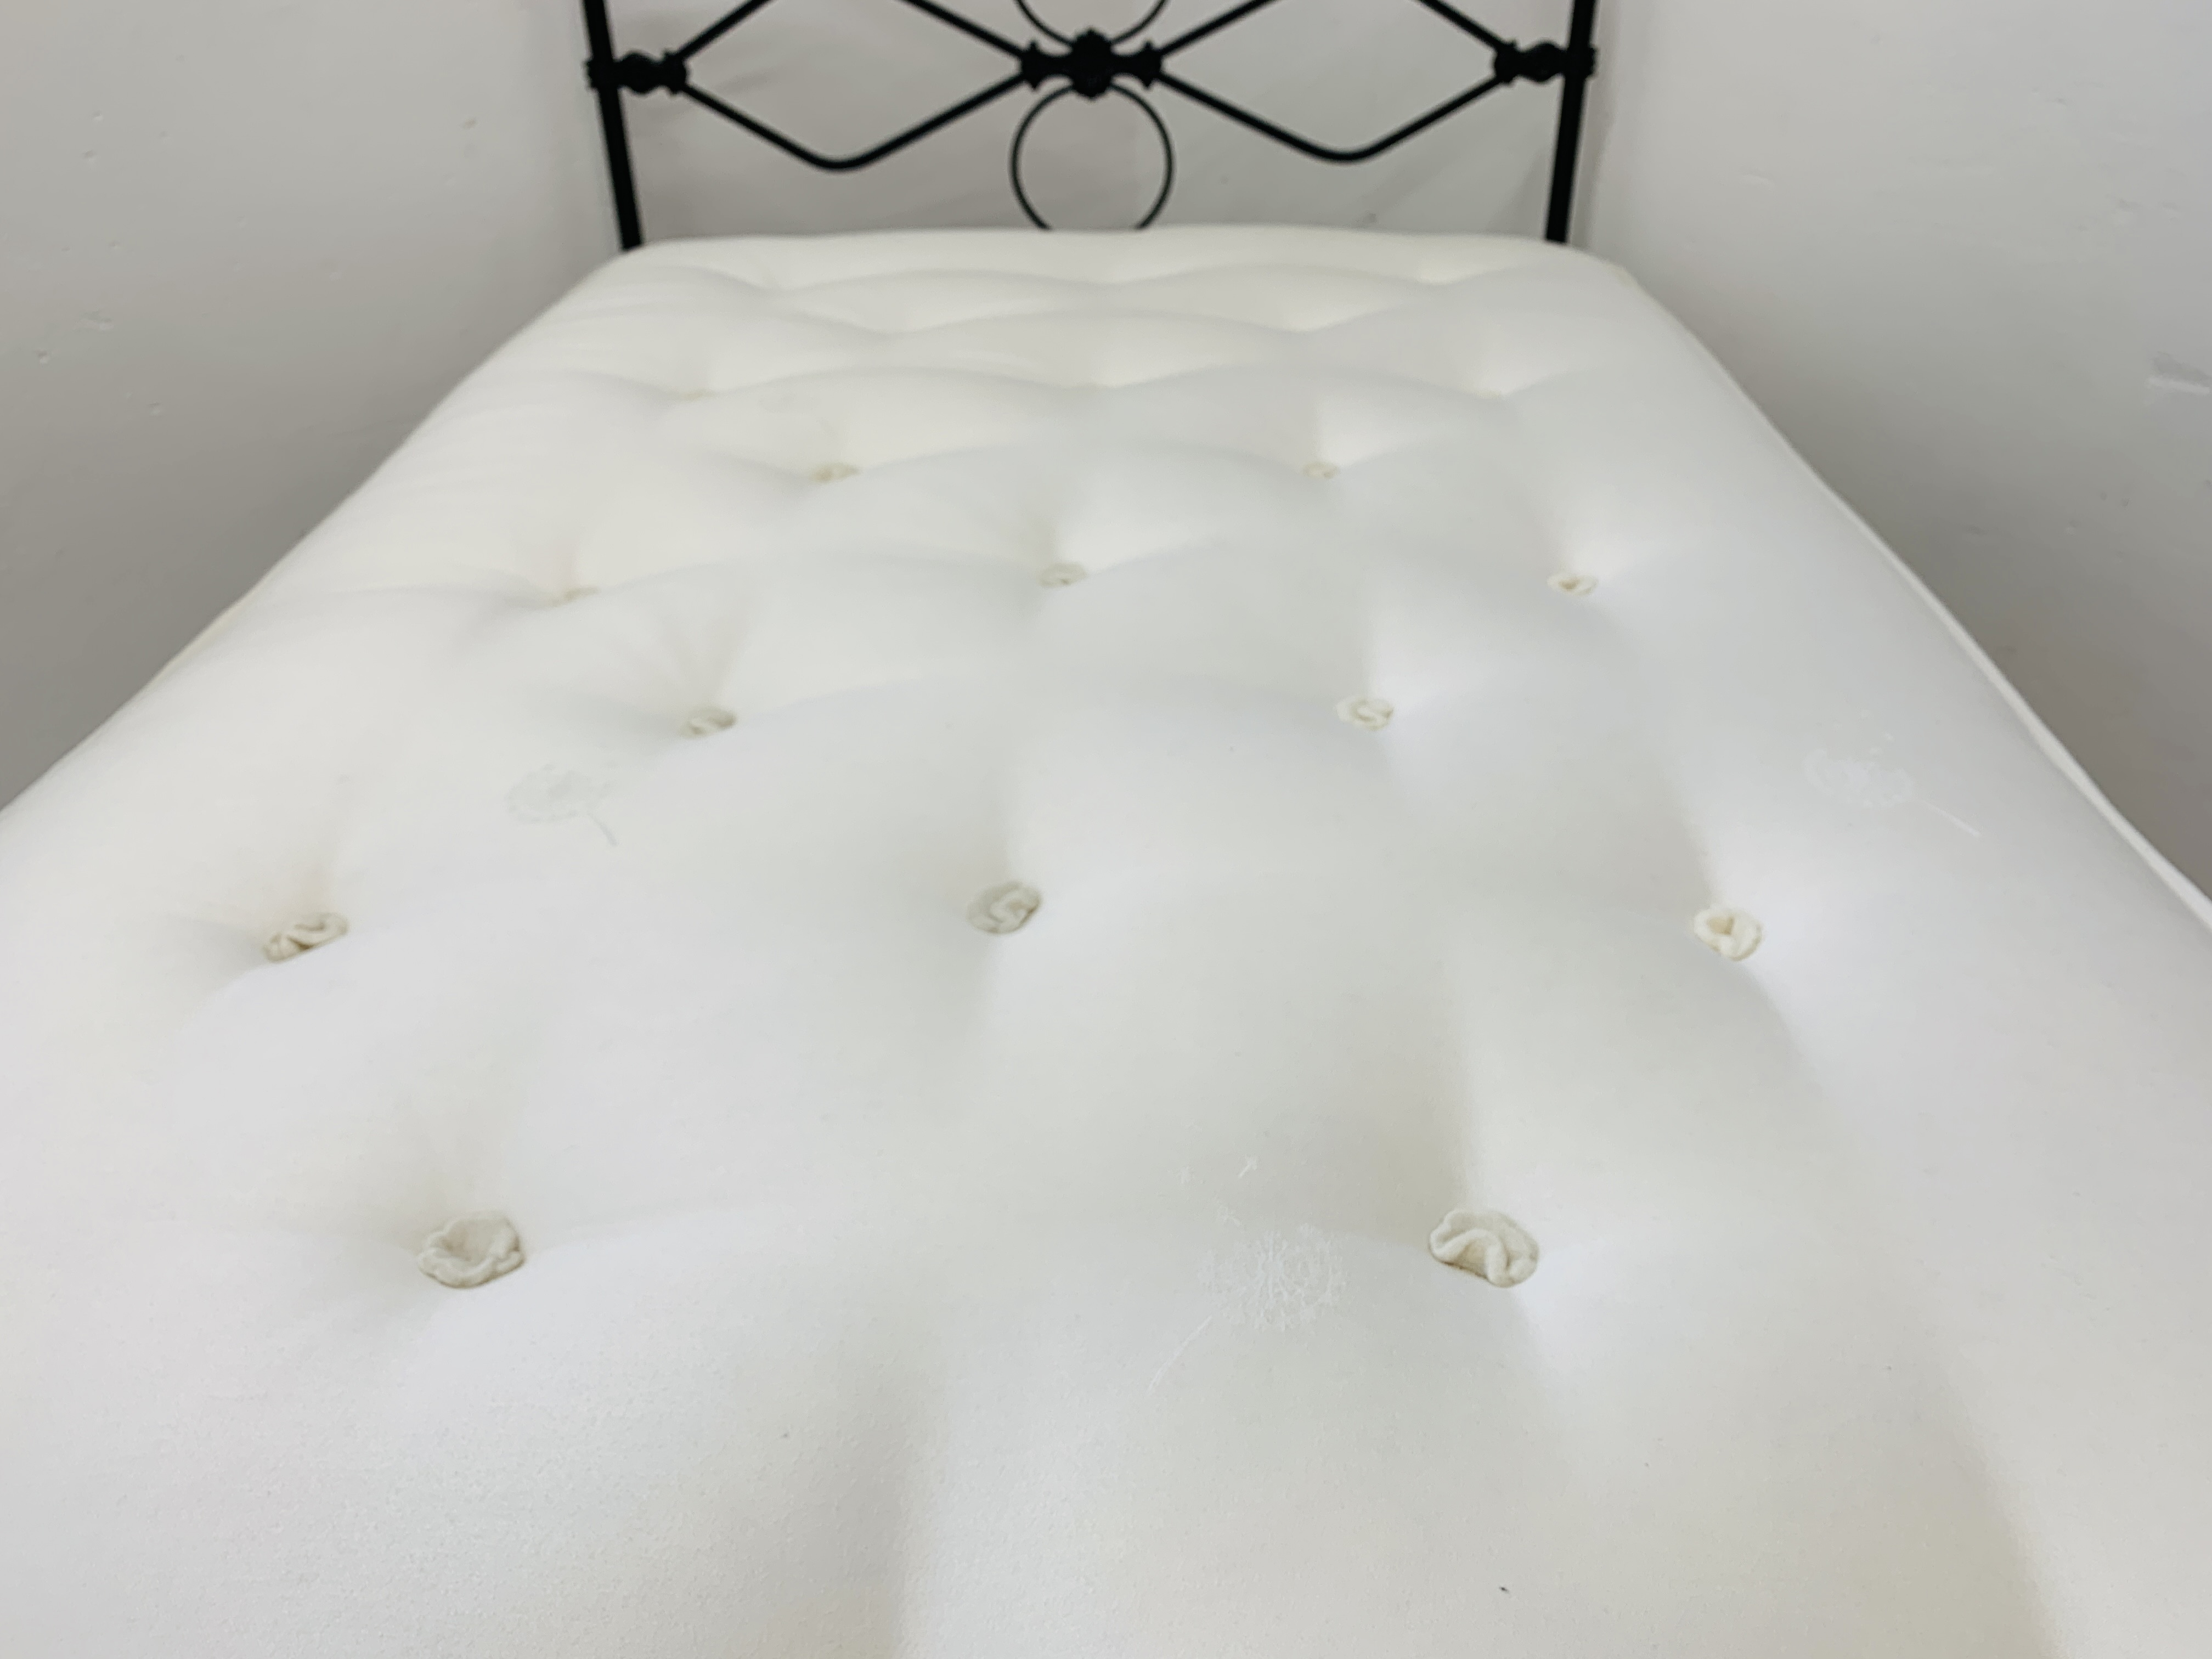 A VICTORIAN STYLE SINGLE IRON FRAMED BEDSTEAD WITH JOHN LEWIS LUXURY MATTRESS. - Image 10 of 16